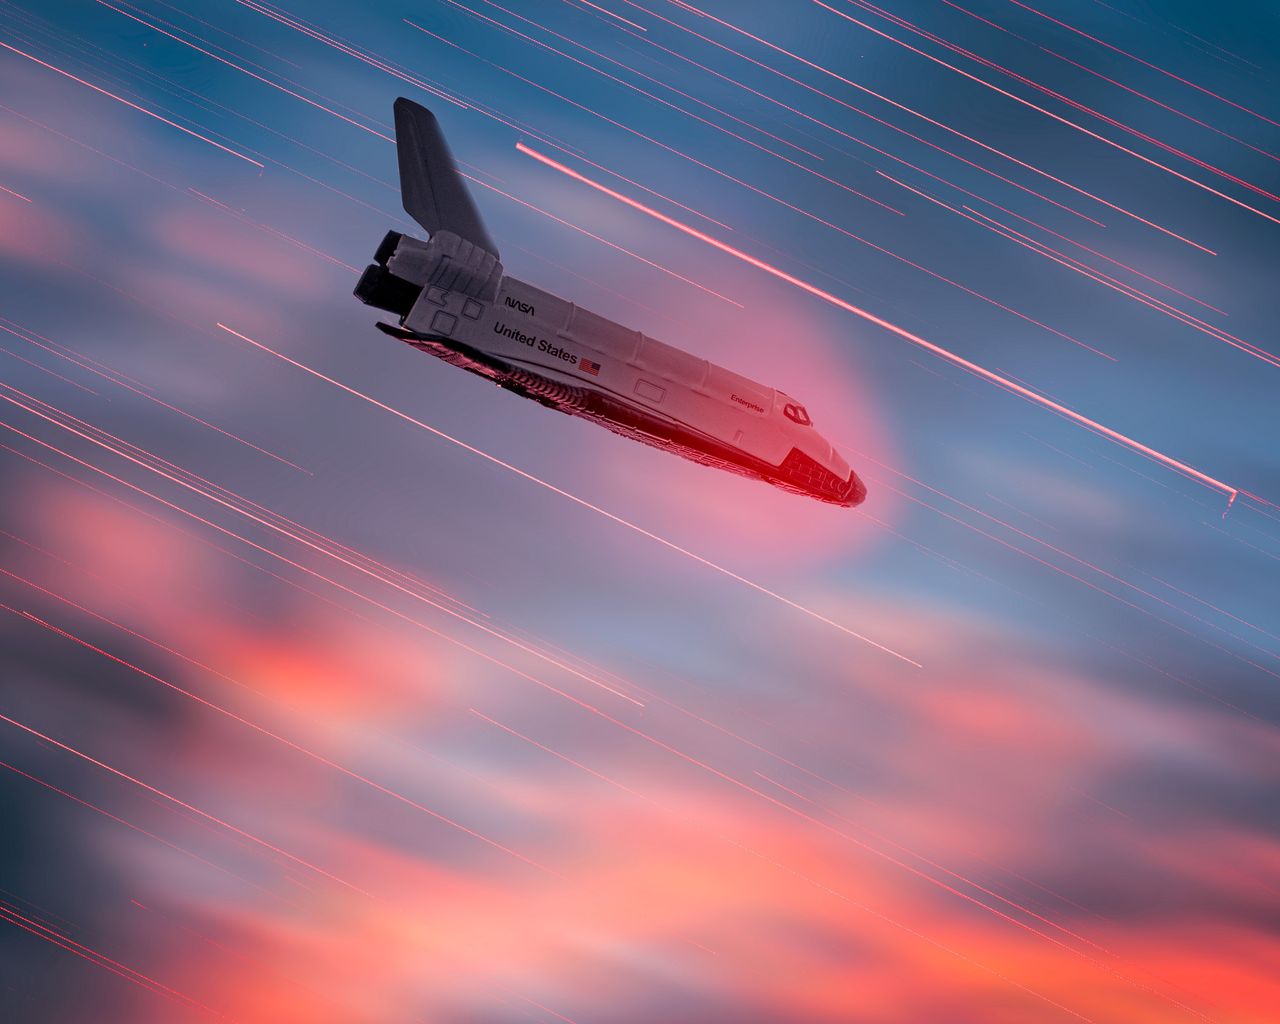 space shuttle entering the atmosphere